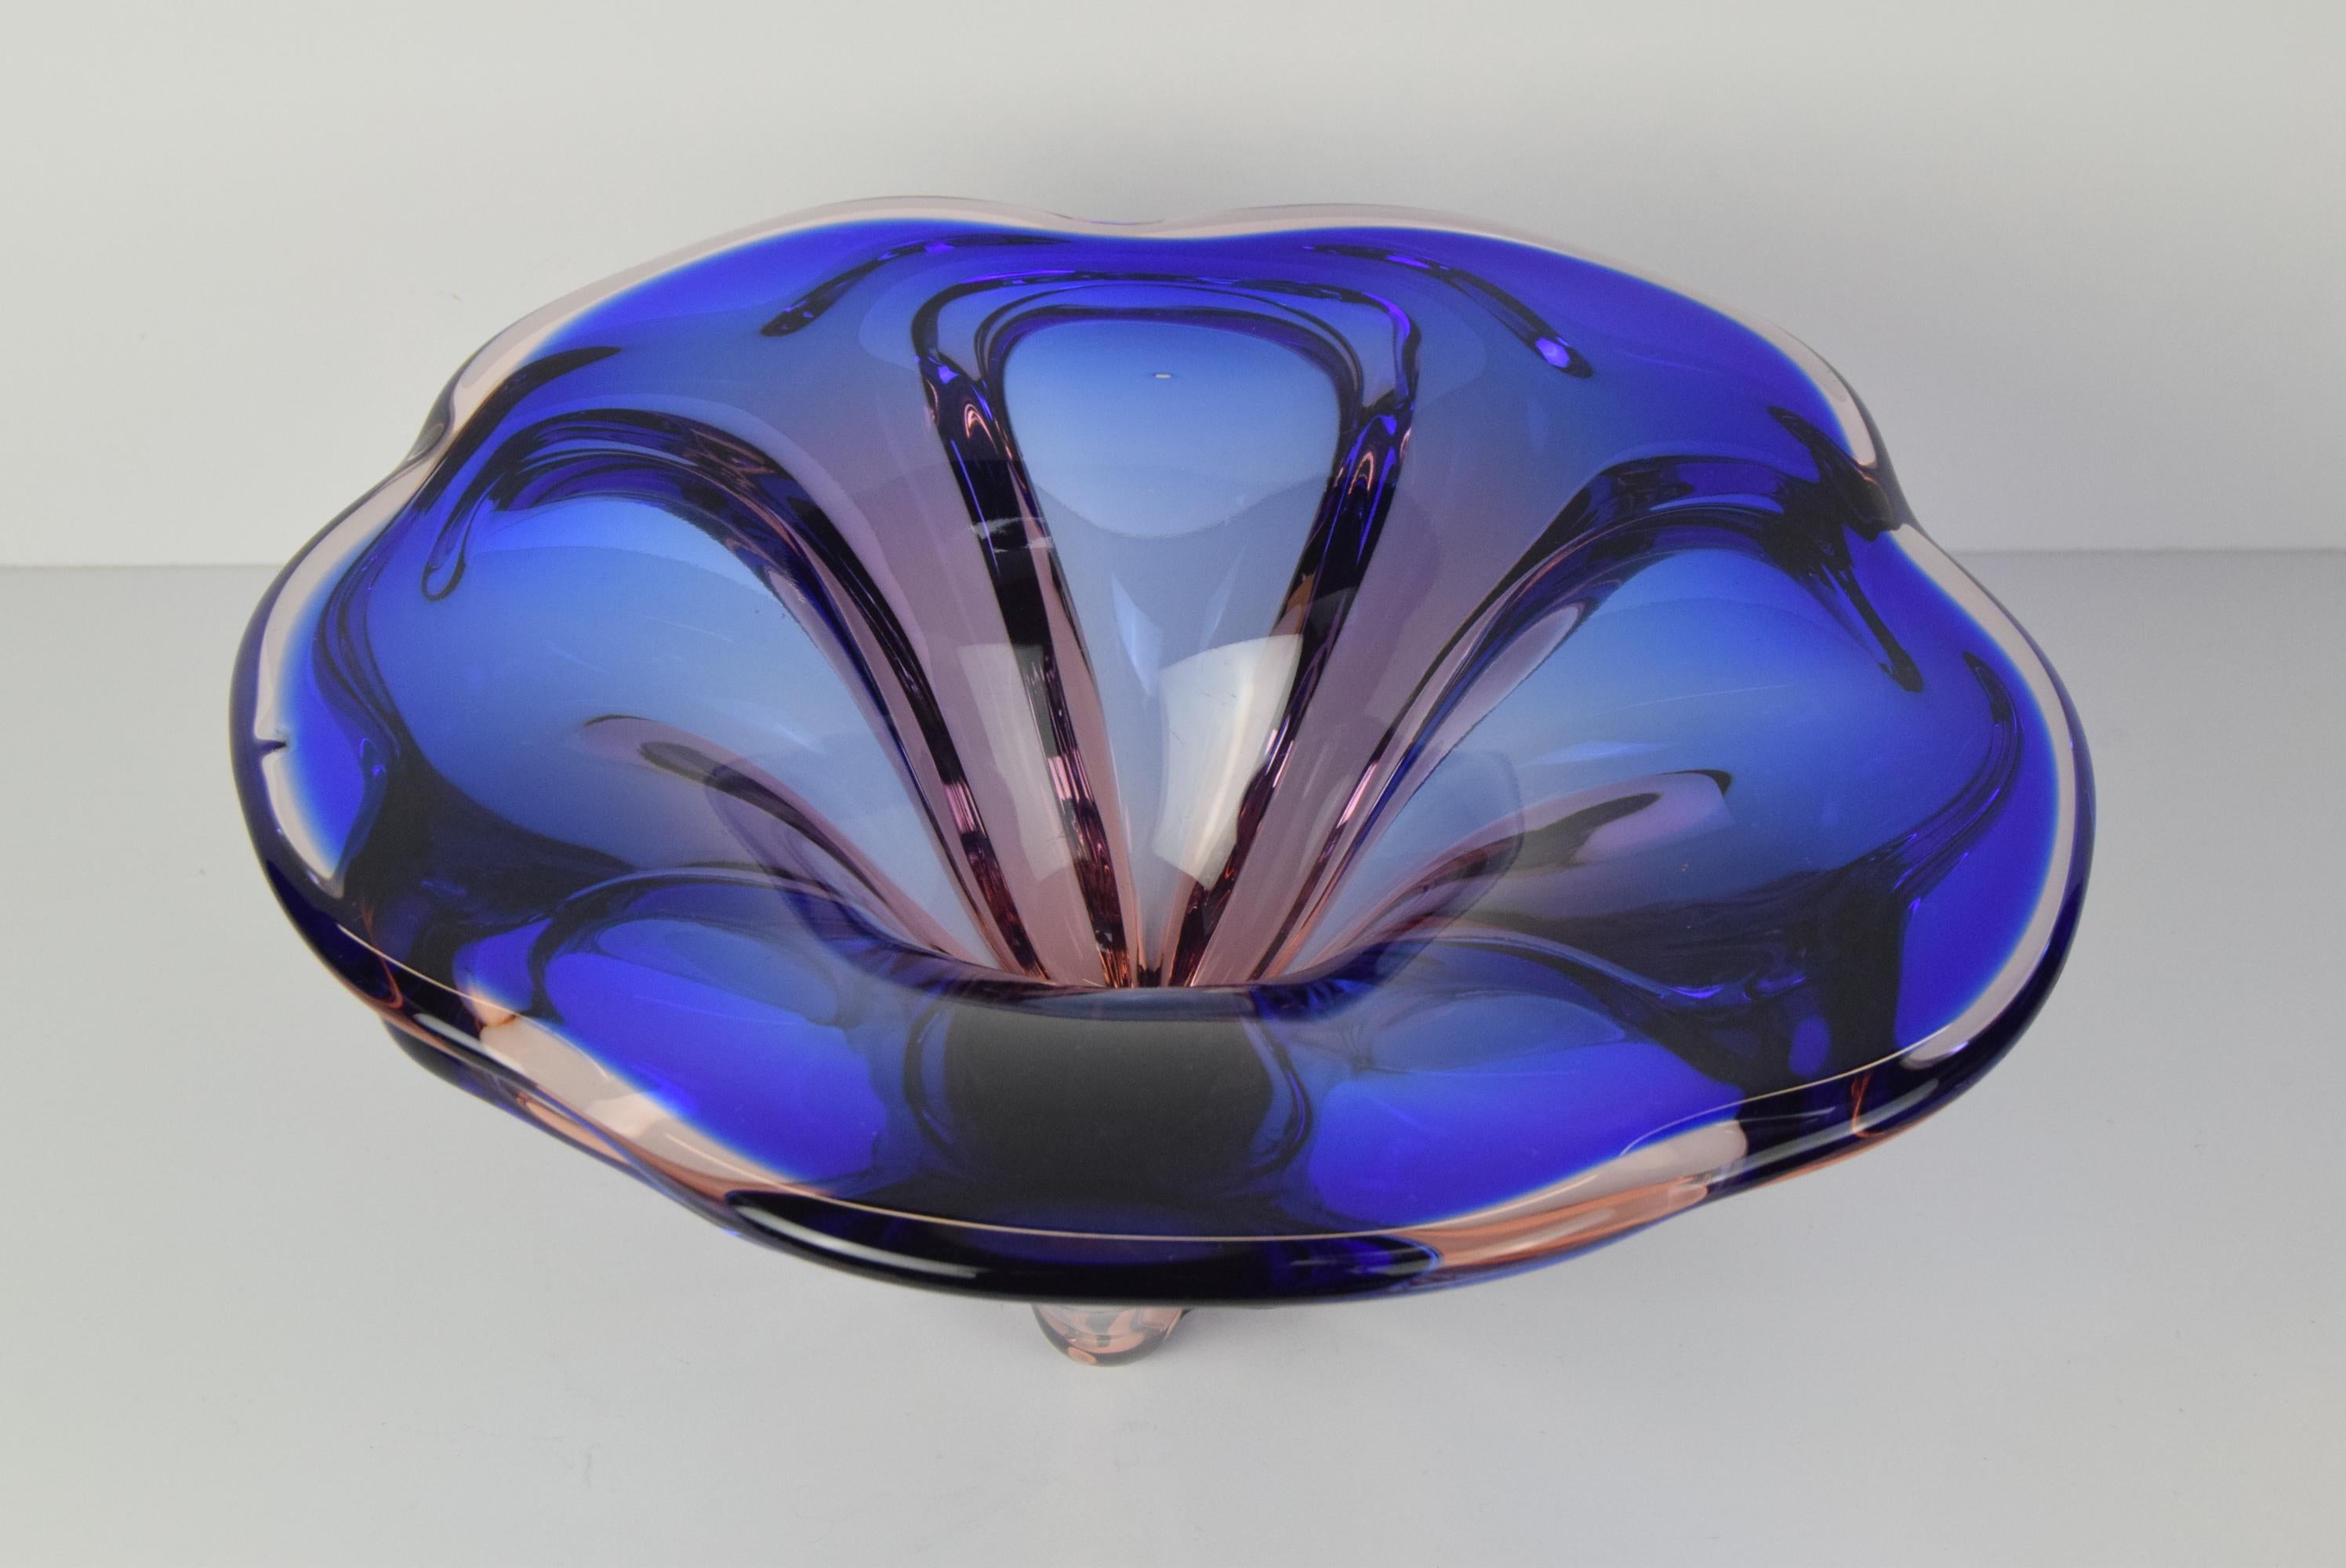 
A beautiful bowl made of cobalt and rosalin glass designed by Josef Hospodka for the Chřibská glassworks in the former Czechoslovakia.
The bowl has light scratches on the sides (see foto)
Original Vintage Condition
